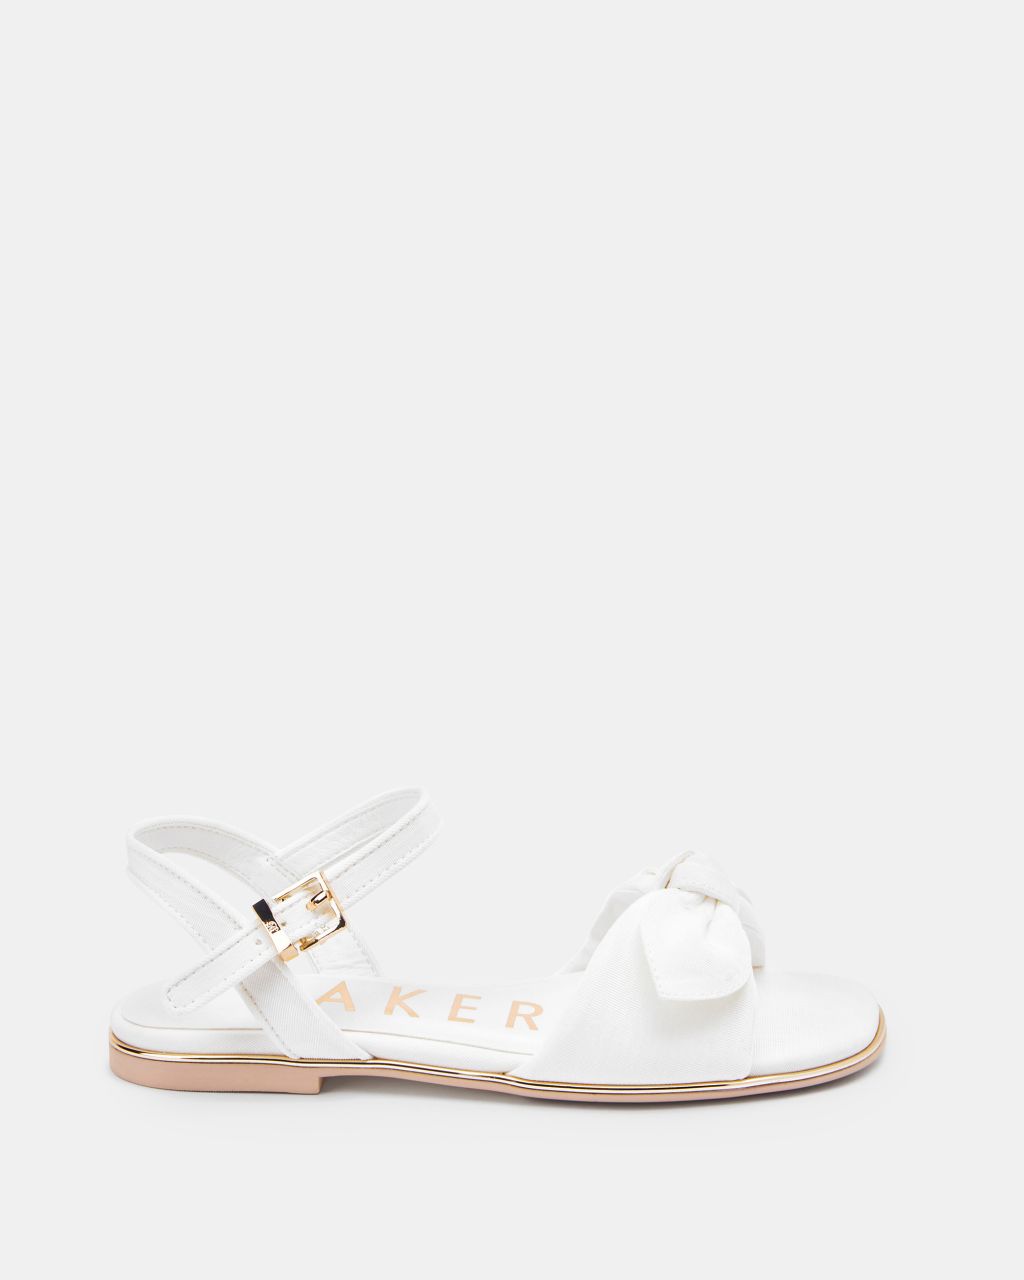 Ted Baker Girls' Bow Detail Strappy Sandals In White, Robba